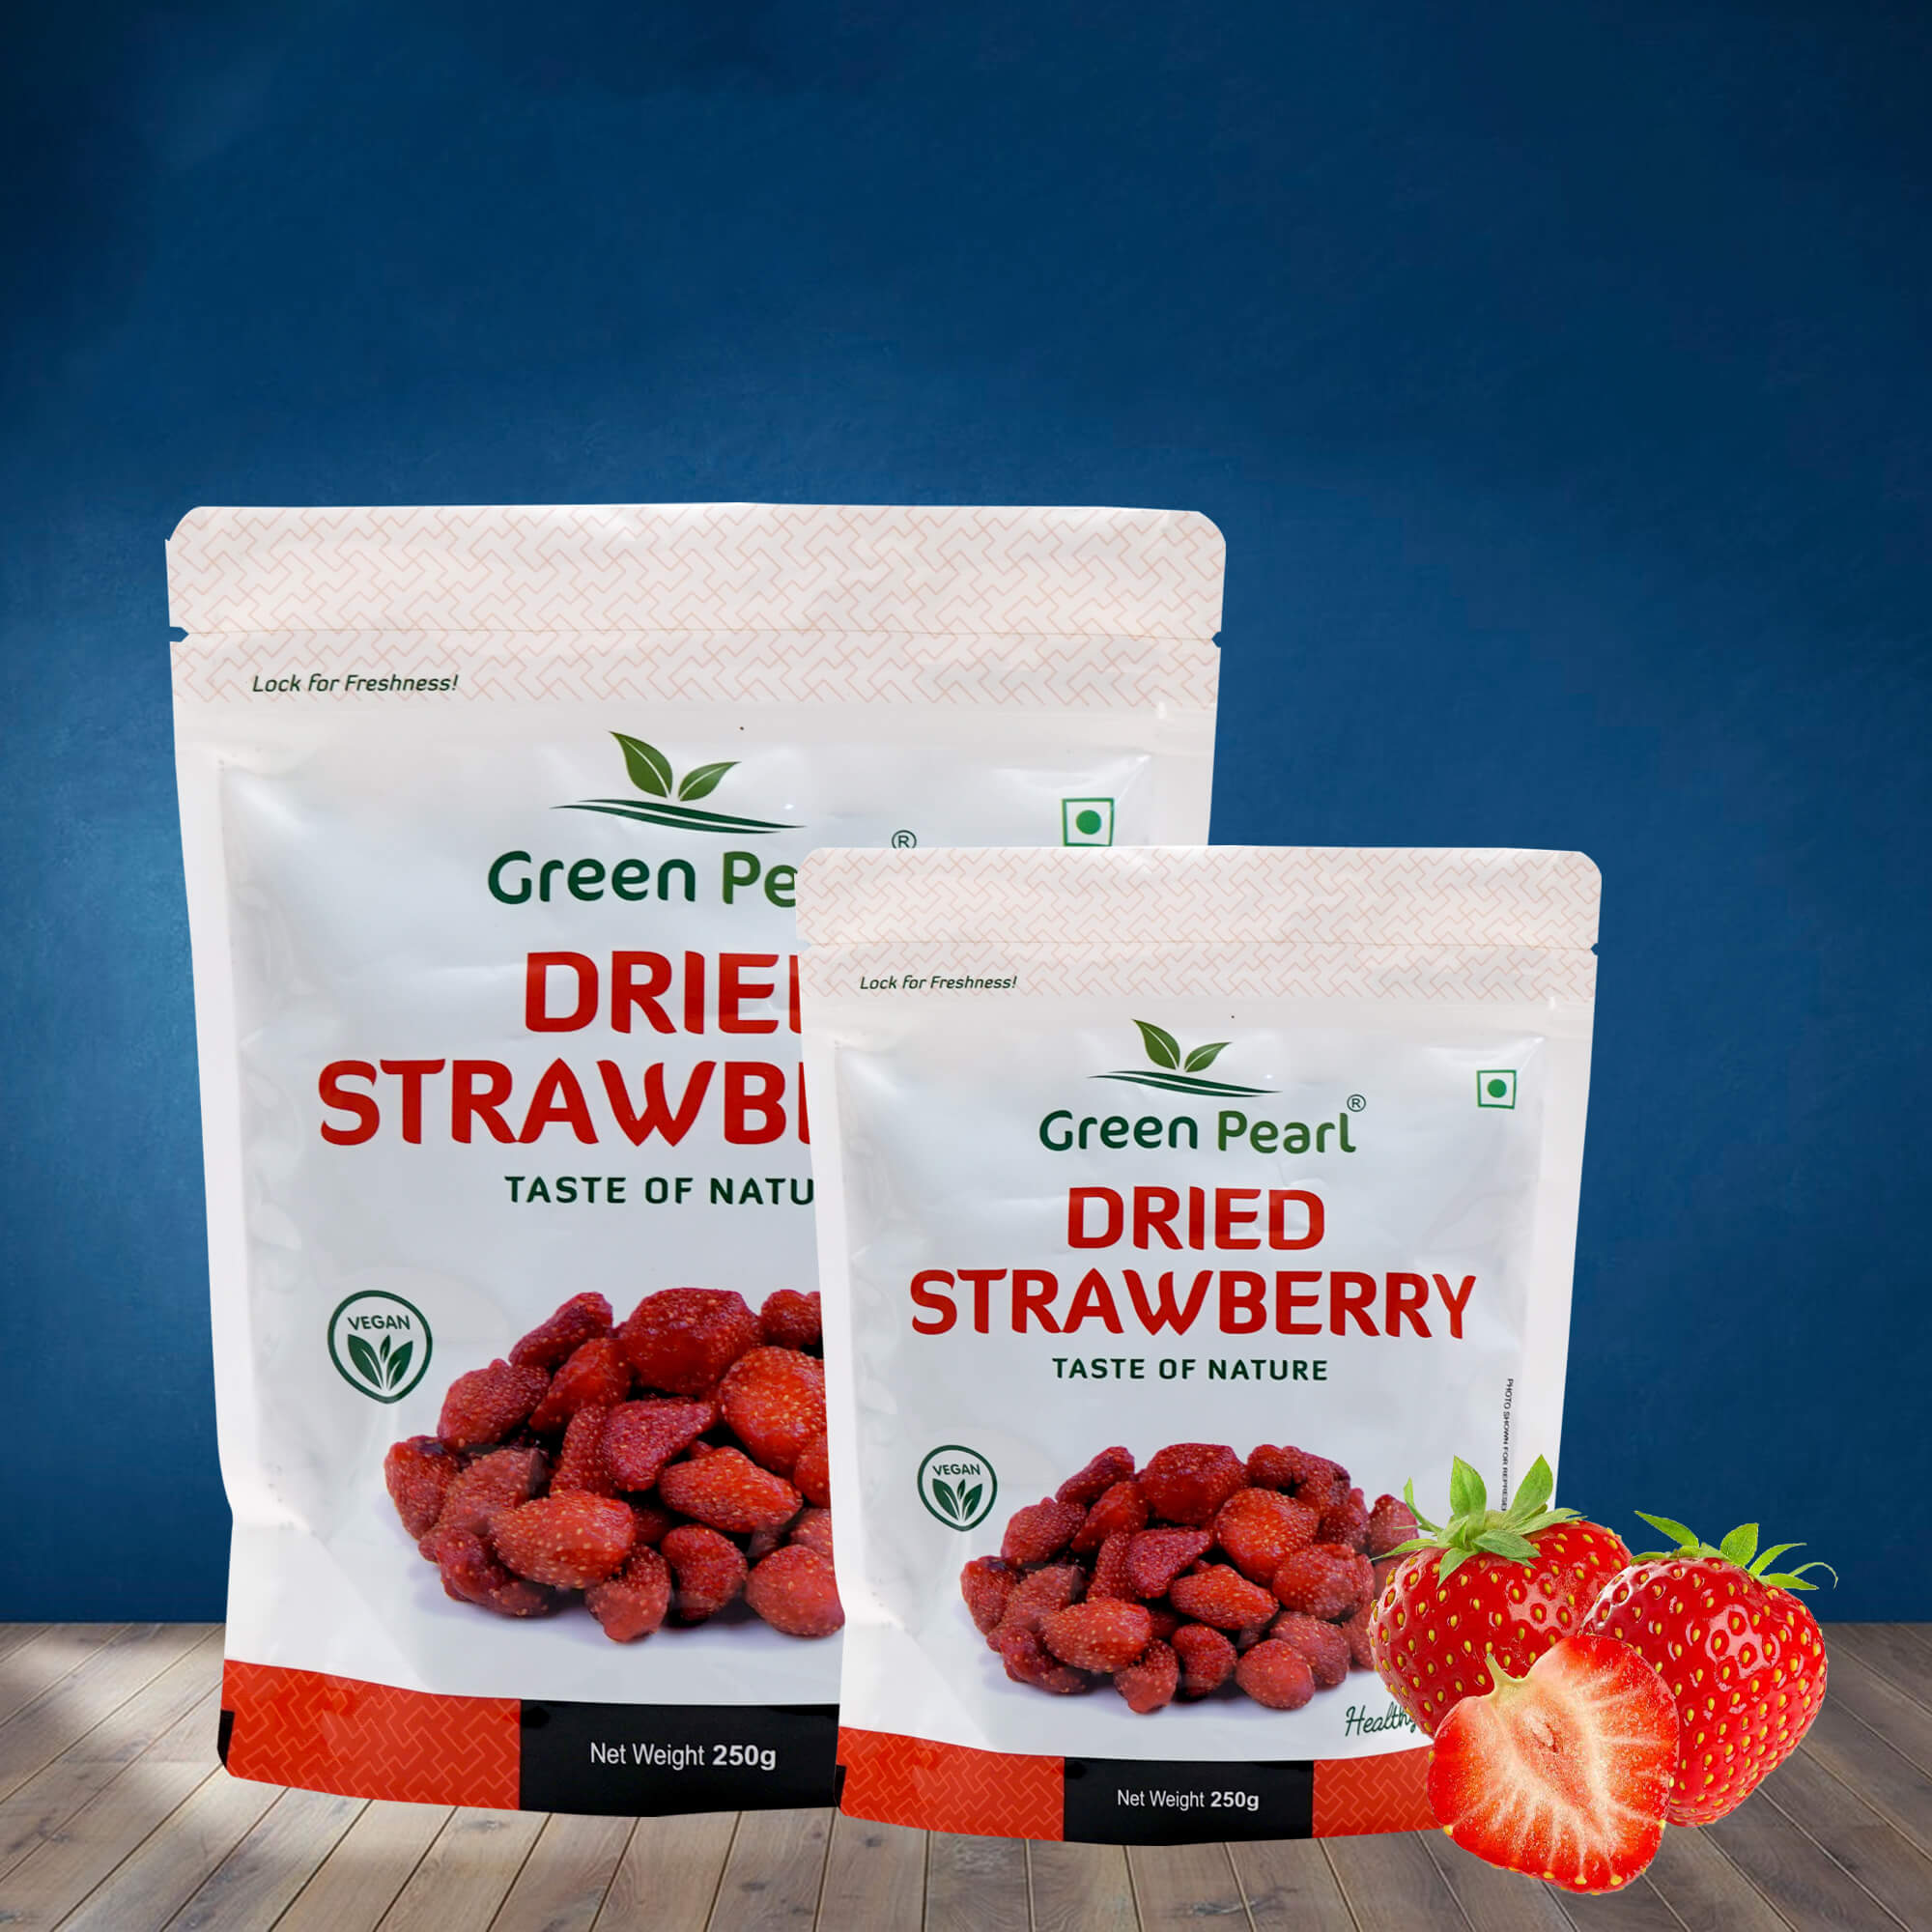 Strawberry packaging